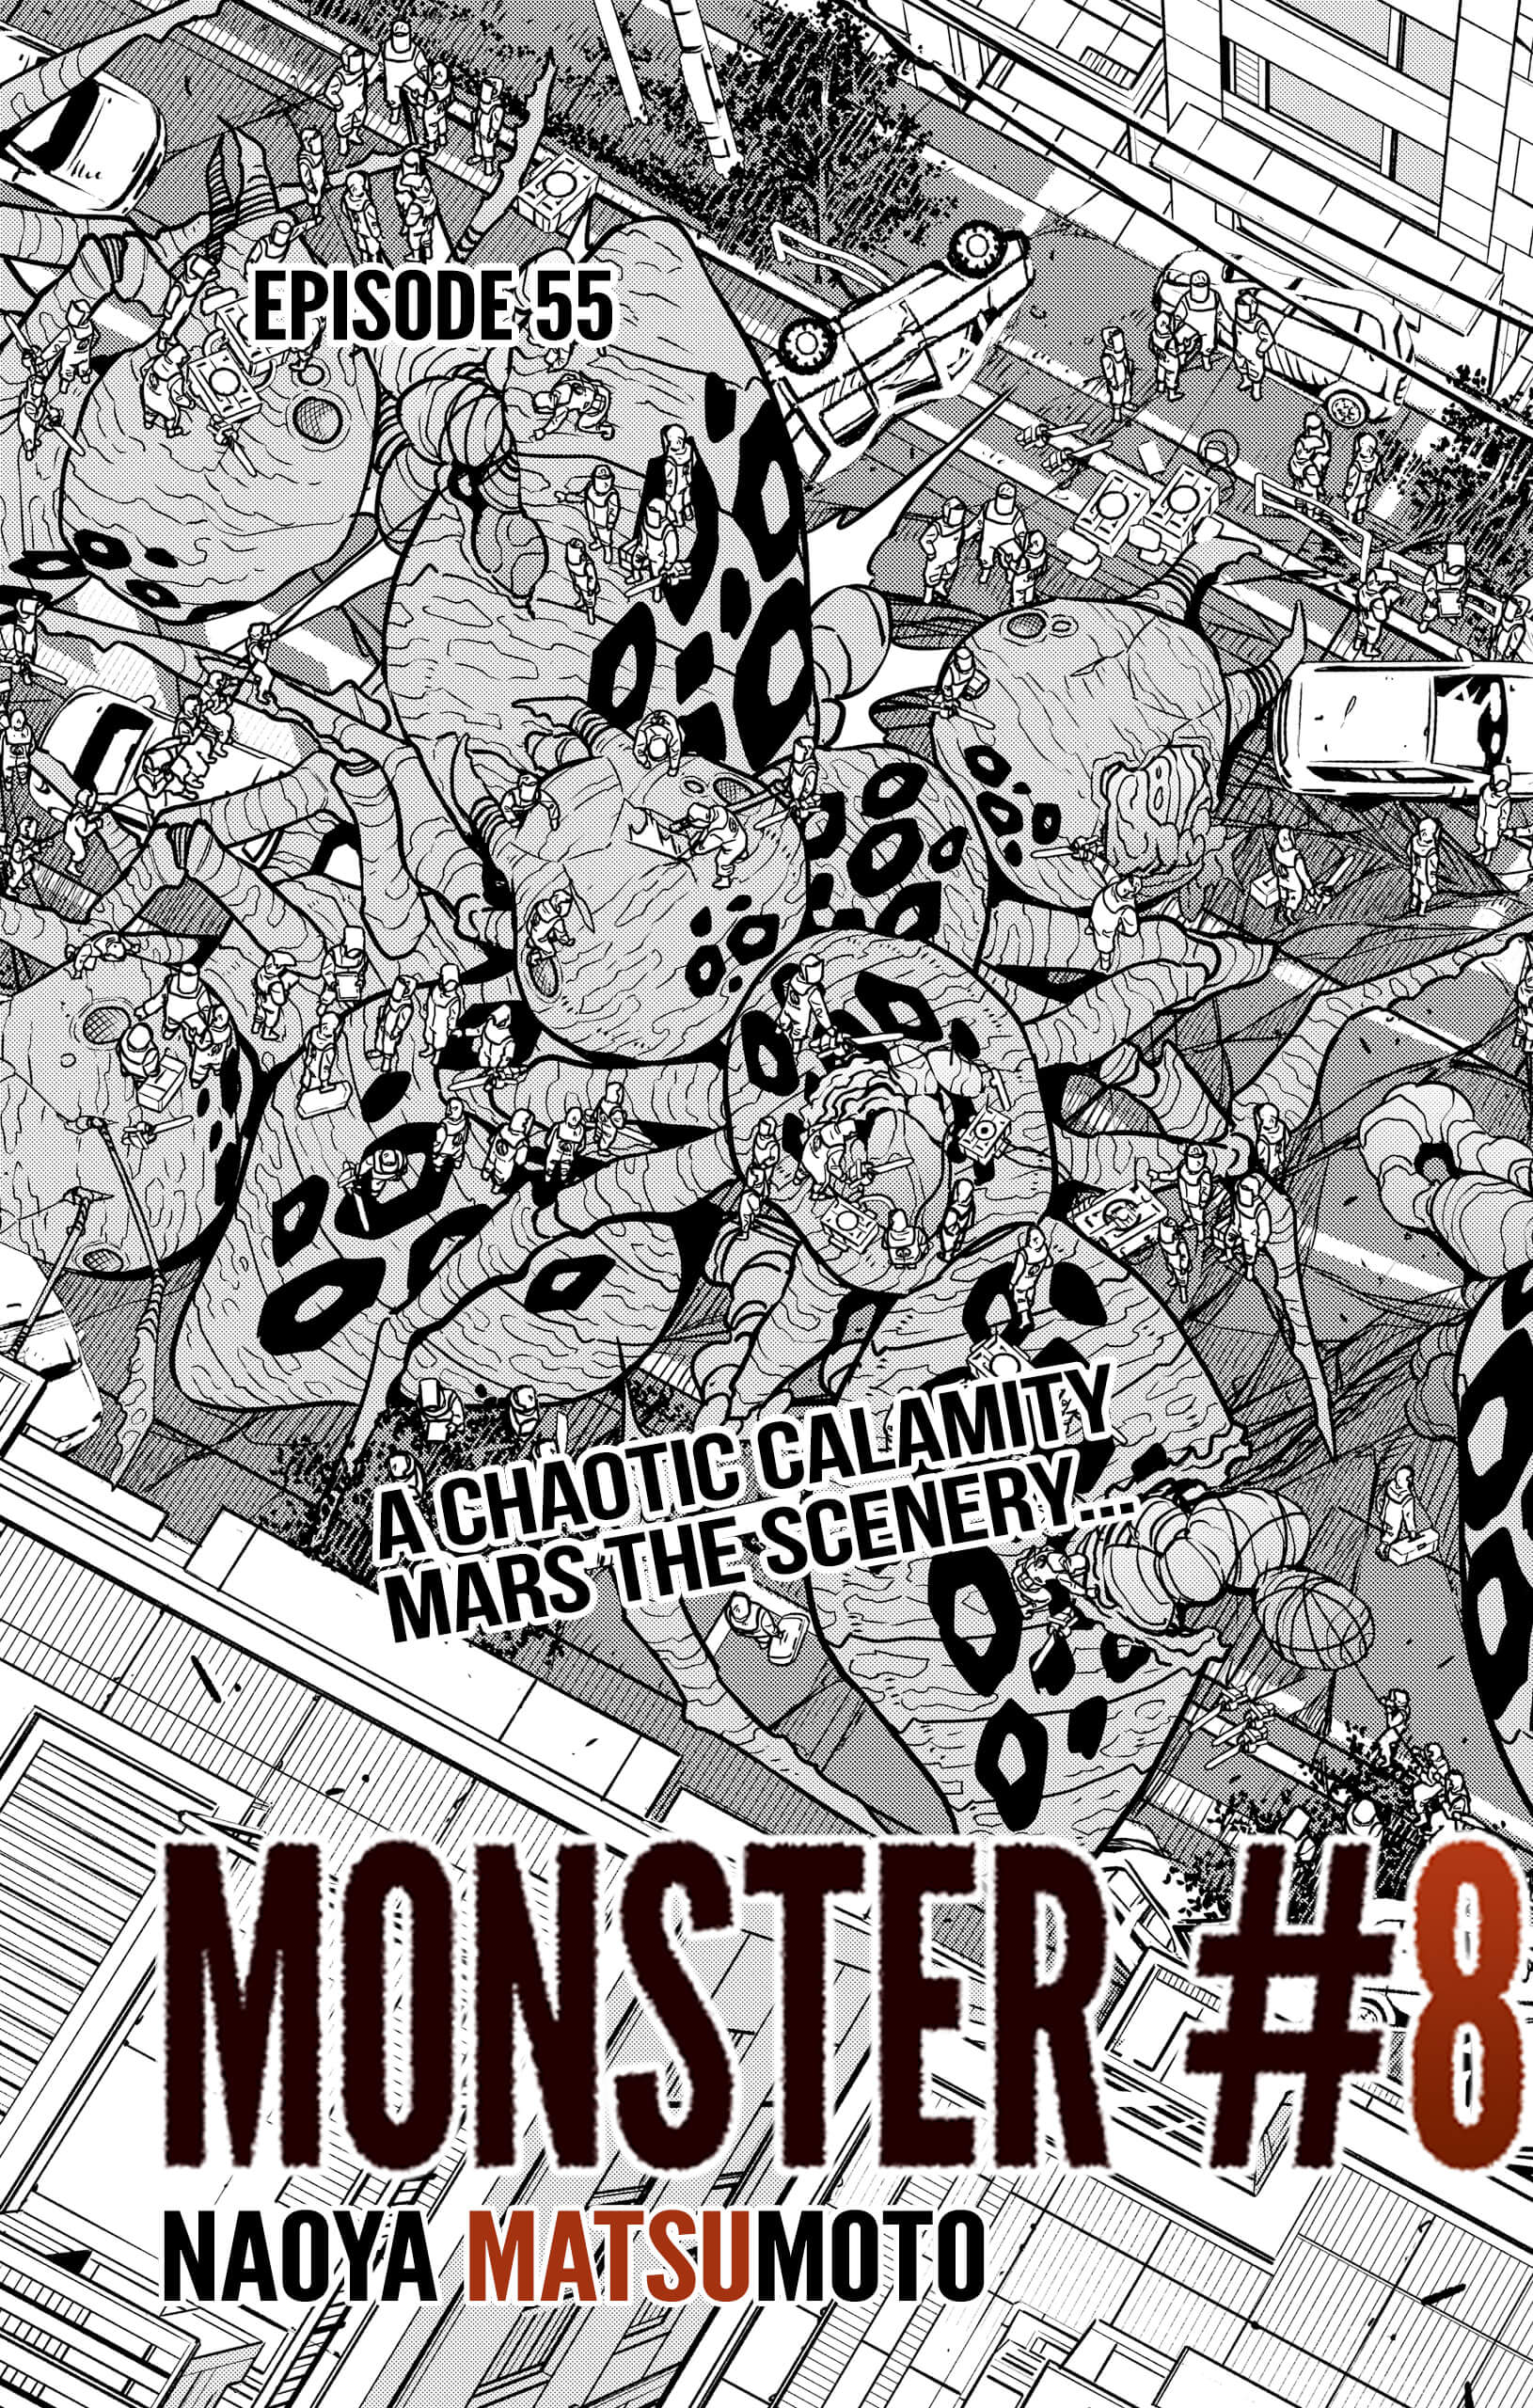 Kaiju no 8 Chapter 55, monster #8 chapter 55